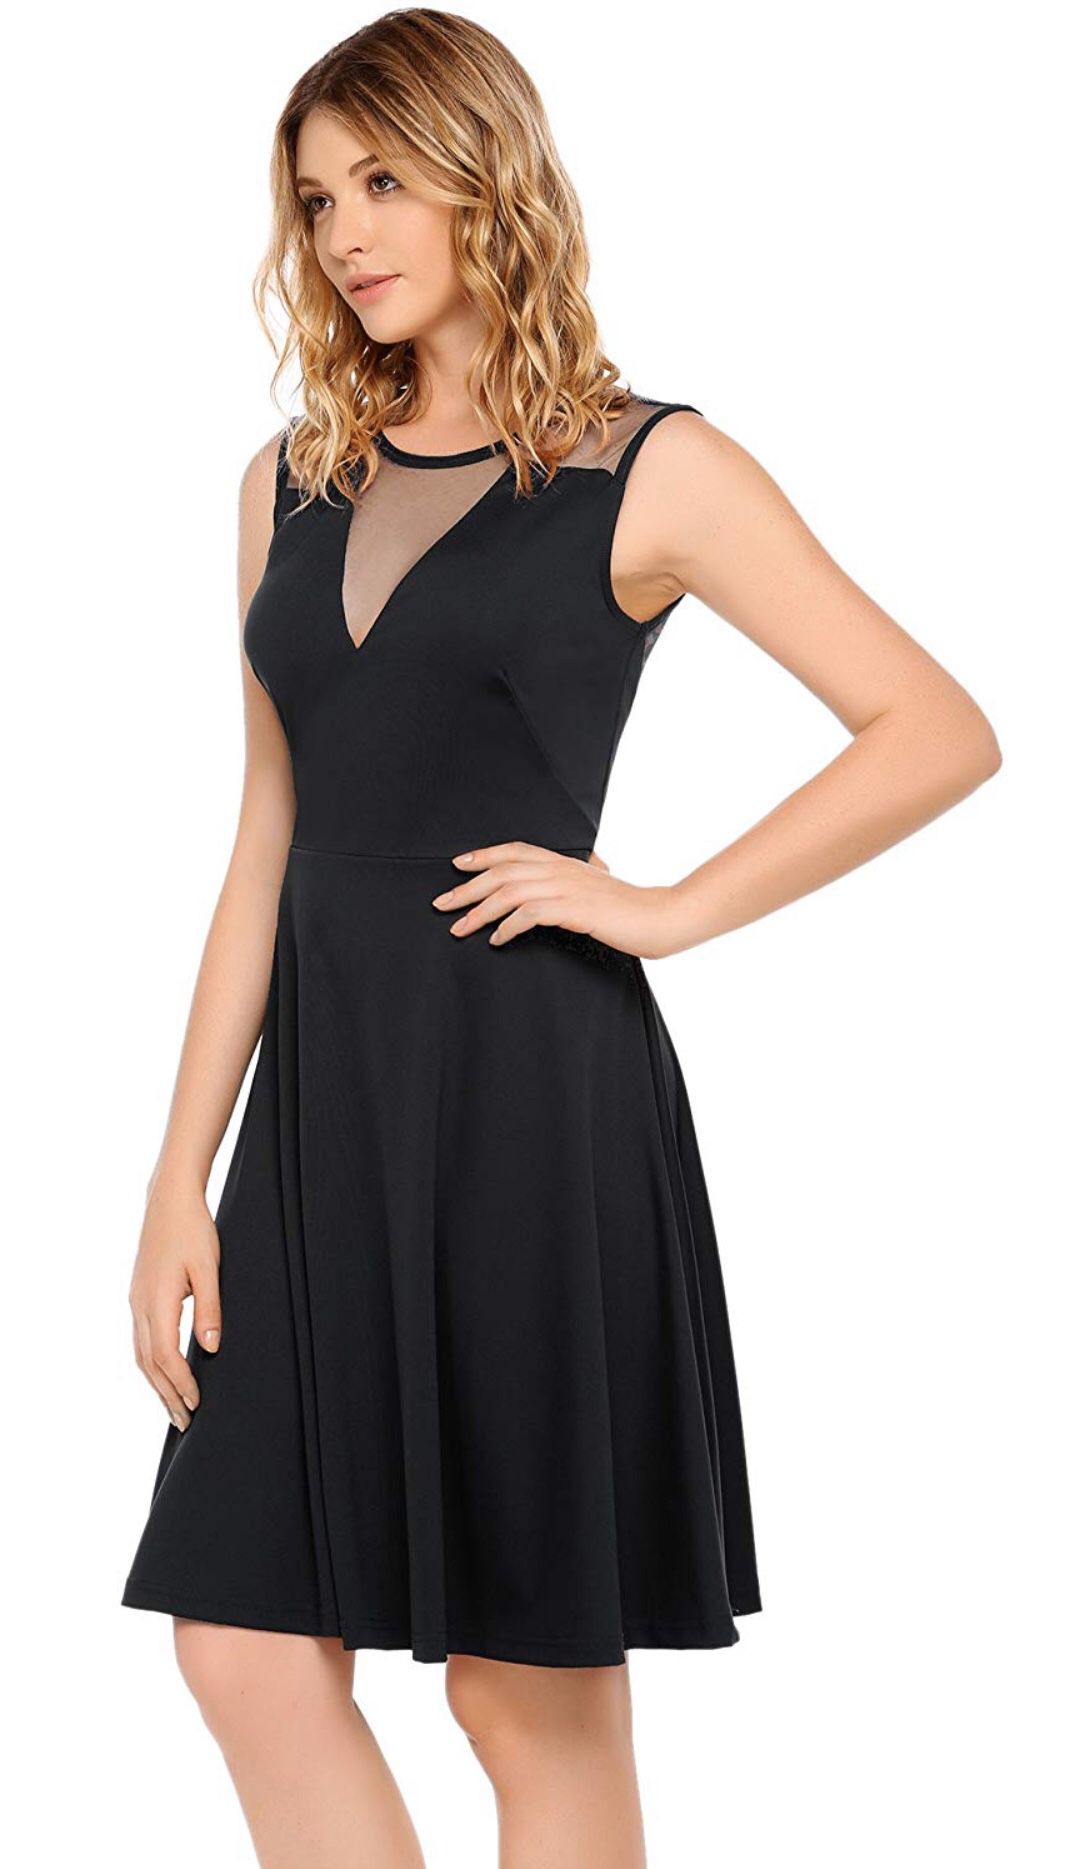 Women's cocktail Dress-Small